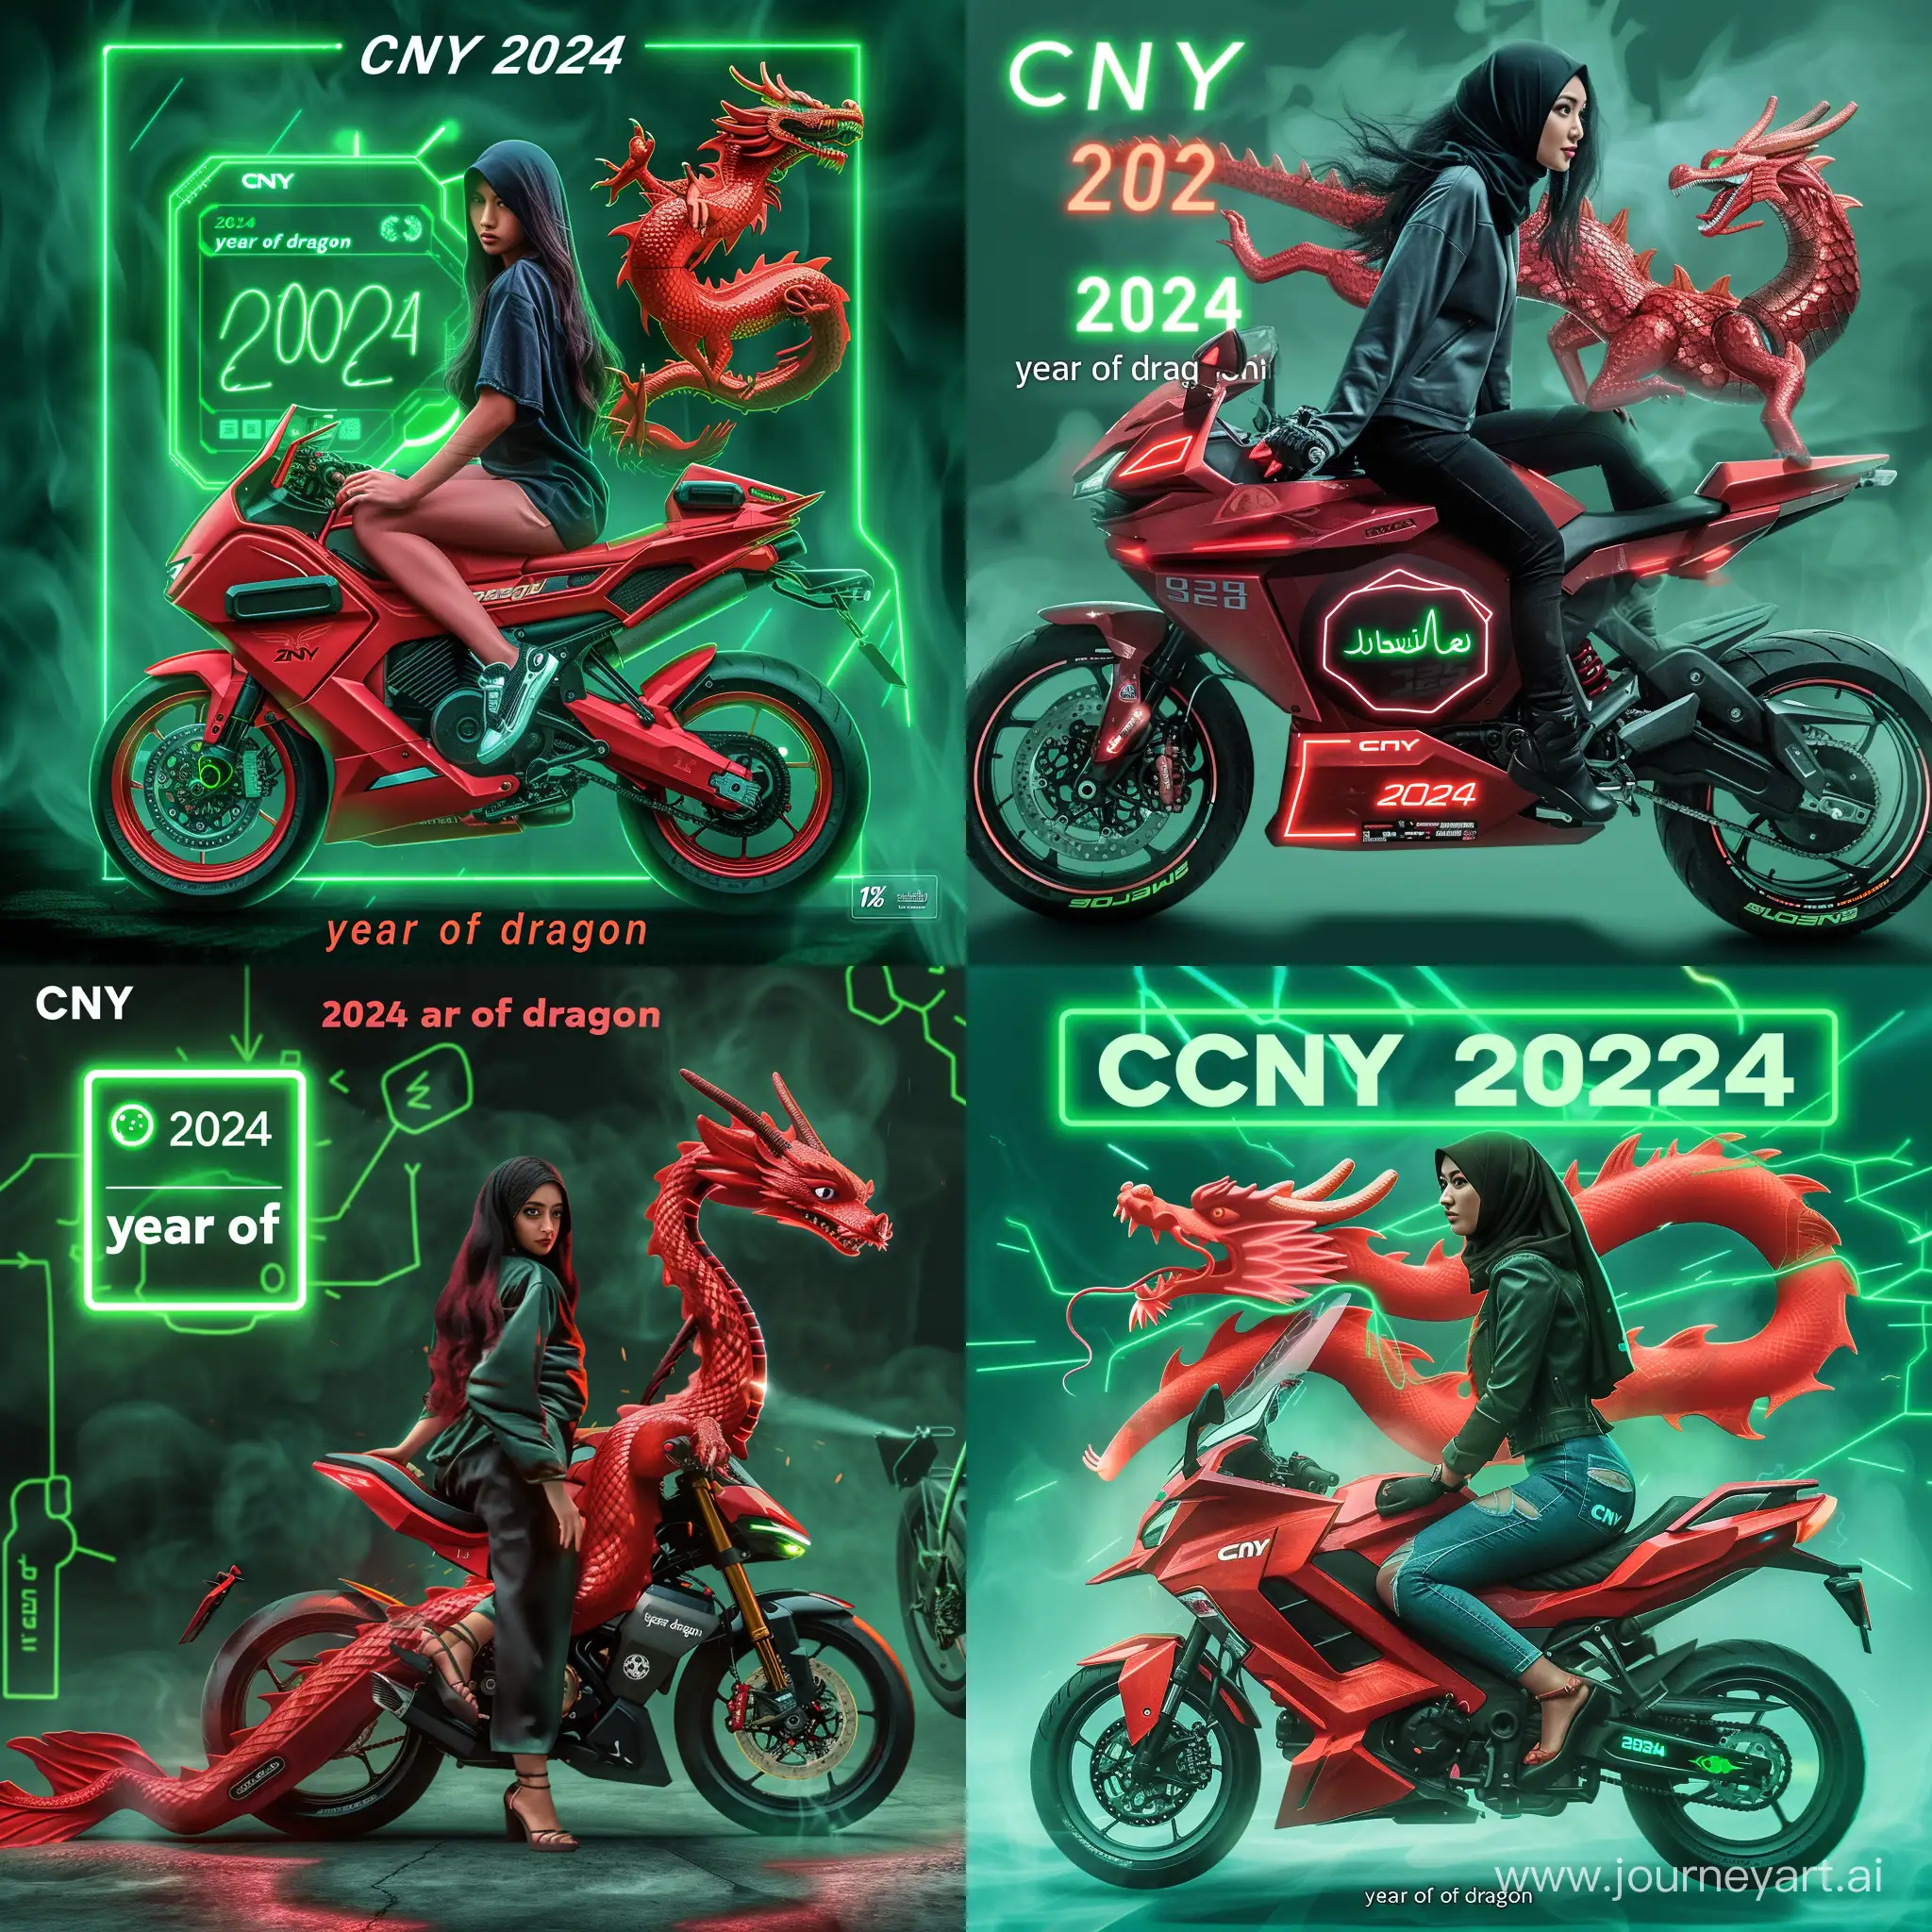 a “CNY 2024” Poster showing a realistic stunning Muslimah pose on a futuristic robotic motorbike inspired by red dragon with exact brand “year of dragon” a green Hologram of motorbike diagnosis progress 100%, neon lighning, raw, vibrant 